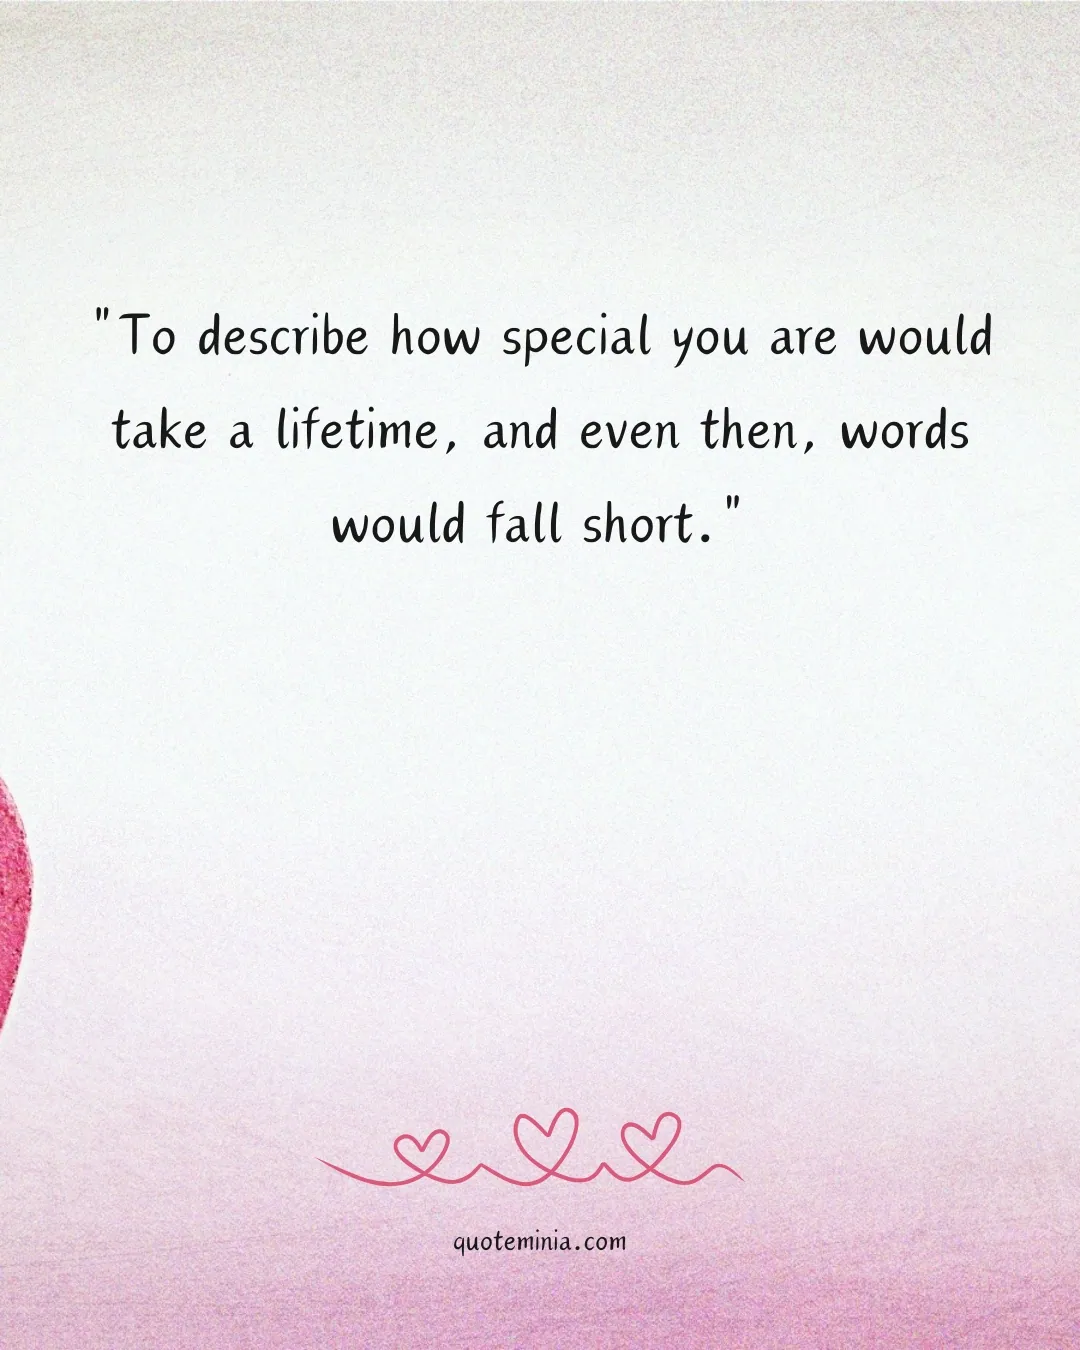 How Special You Are Quotes Image 3